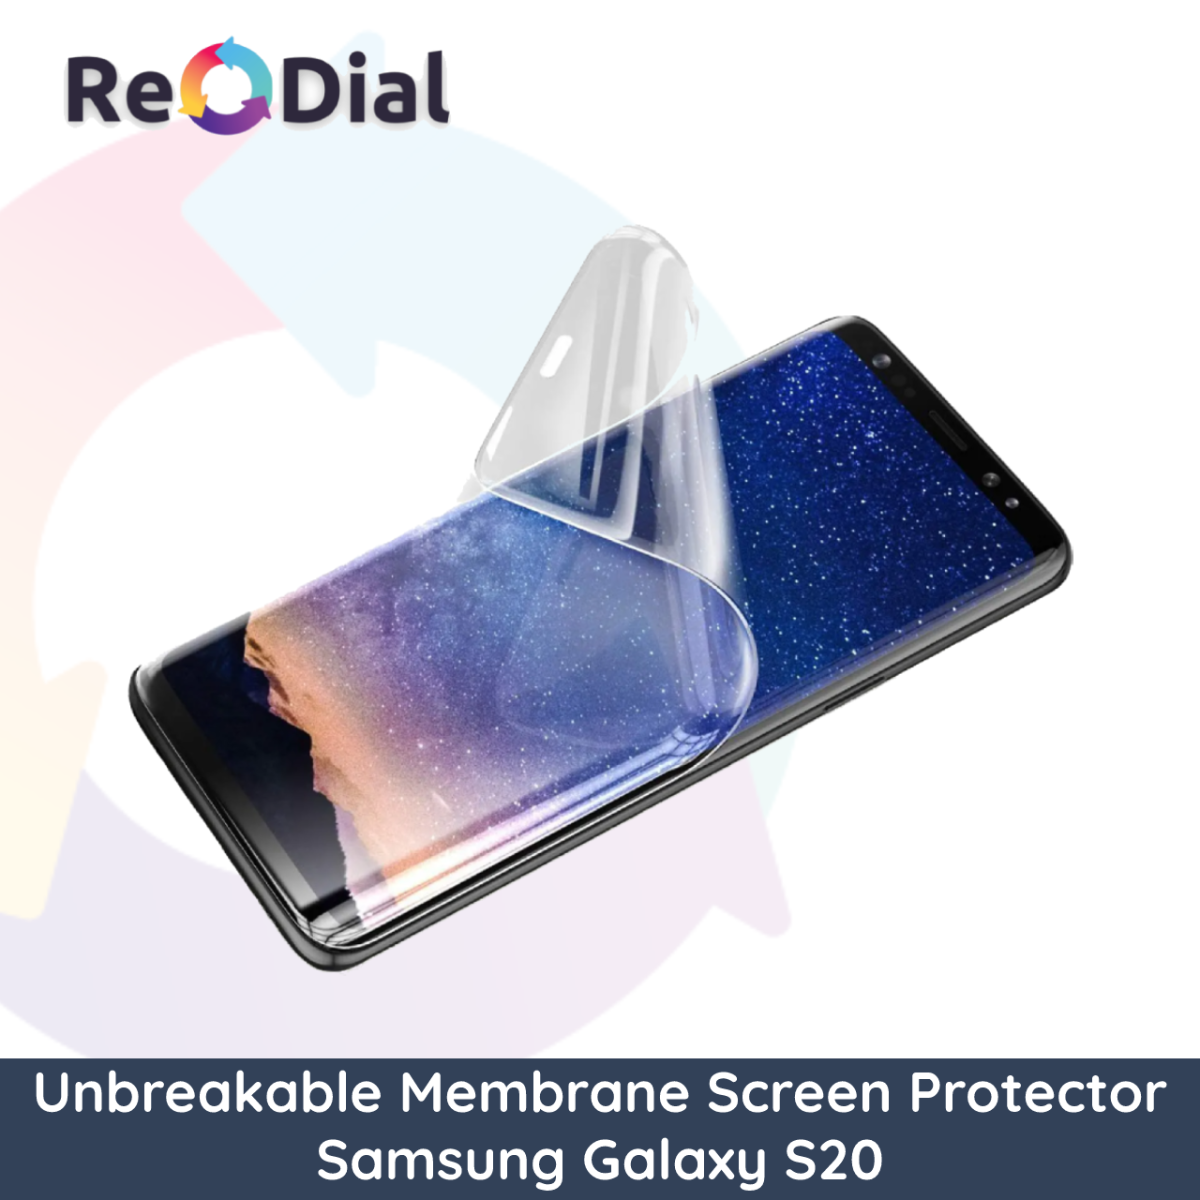 Unbreakable Membrane Screen Protector For Samsung Galaxy S20